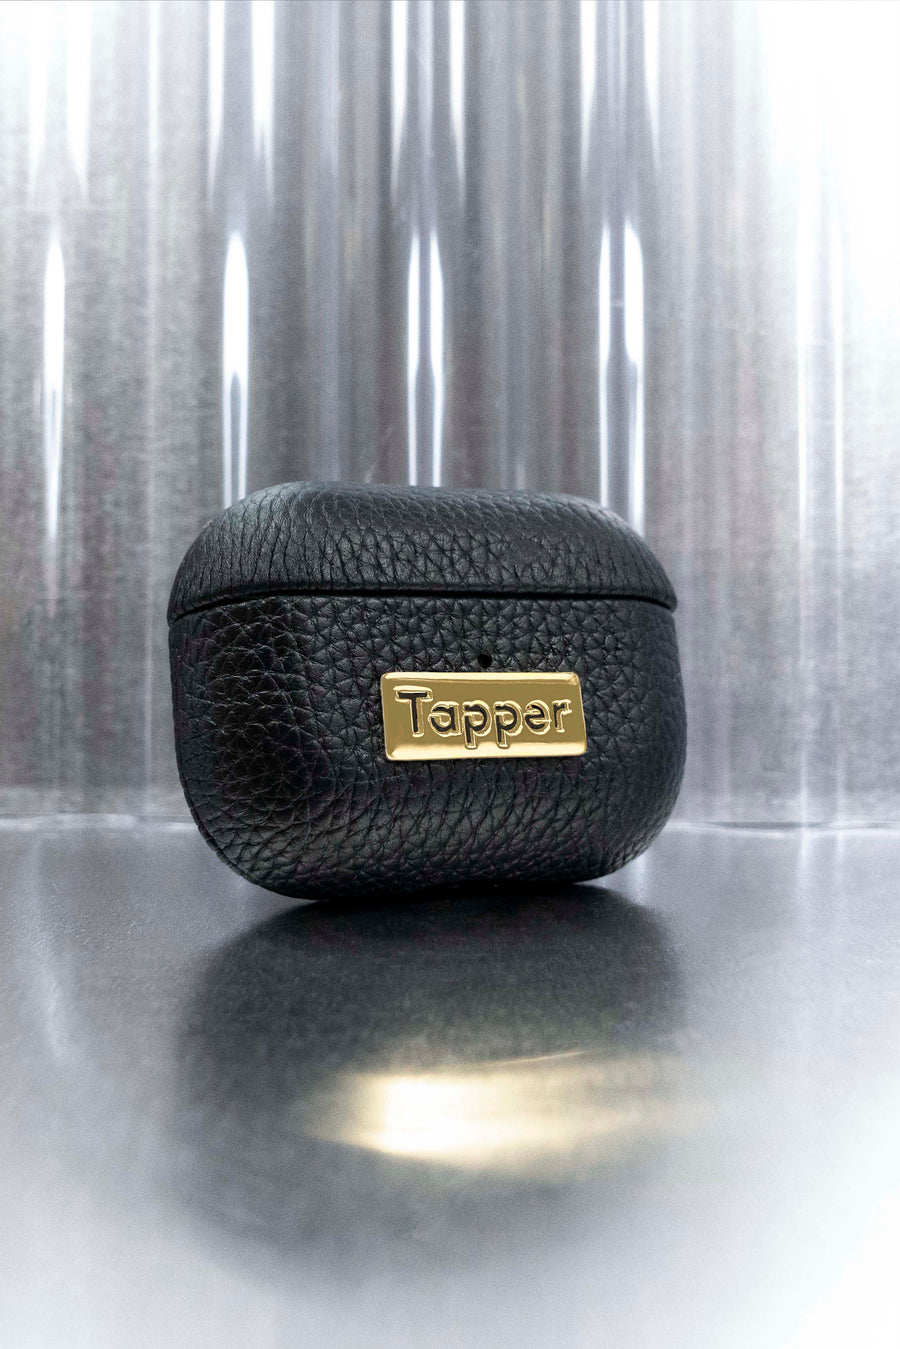 Tapper's luxurious black genuine cow leather AirPods case protects and elevates the look of your AirPods Pro. The luxurious, protective case for AirPods Pro with a metal logo plate in real 18k gold plating steps up your AirPods game. The next must-have high end protective Apple AirPods accessory in real leather and precious metals. Compatible with AirPods Pro. Designed in Sweden by Tapper. Free Express Shipping at gettapper.com